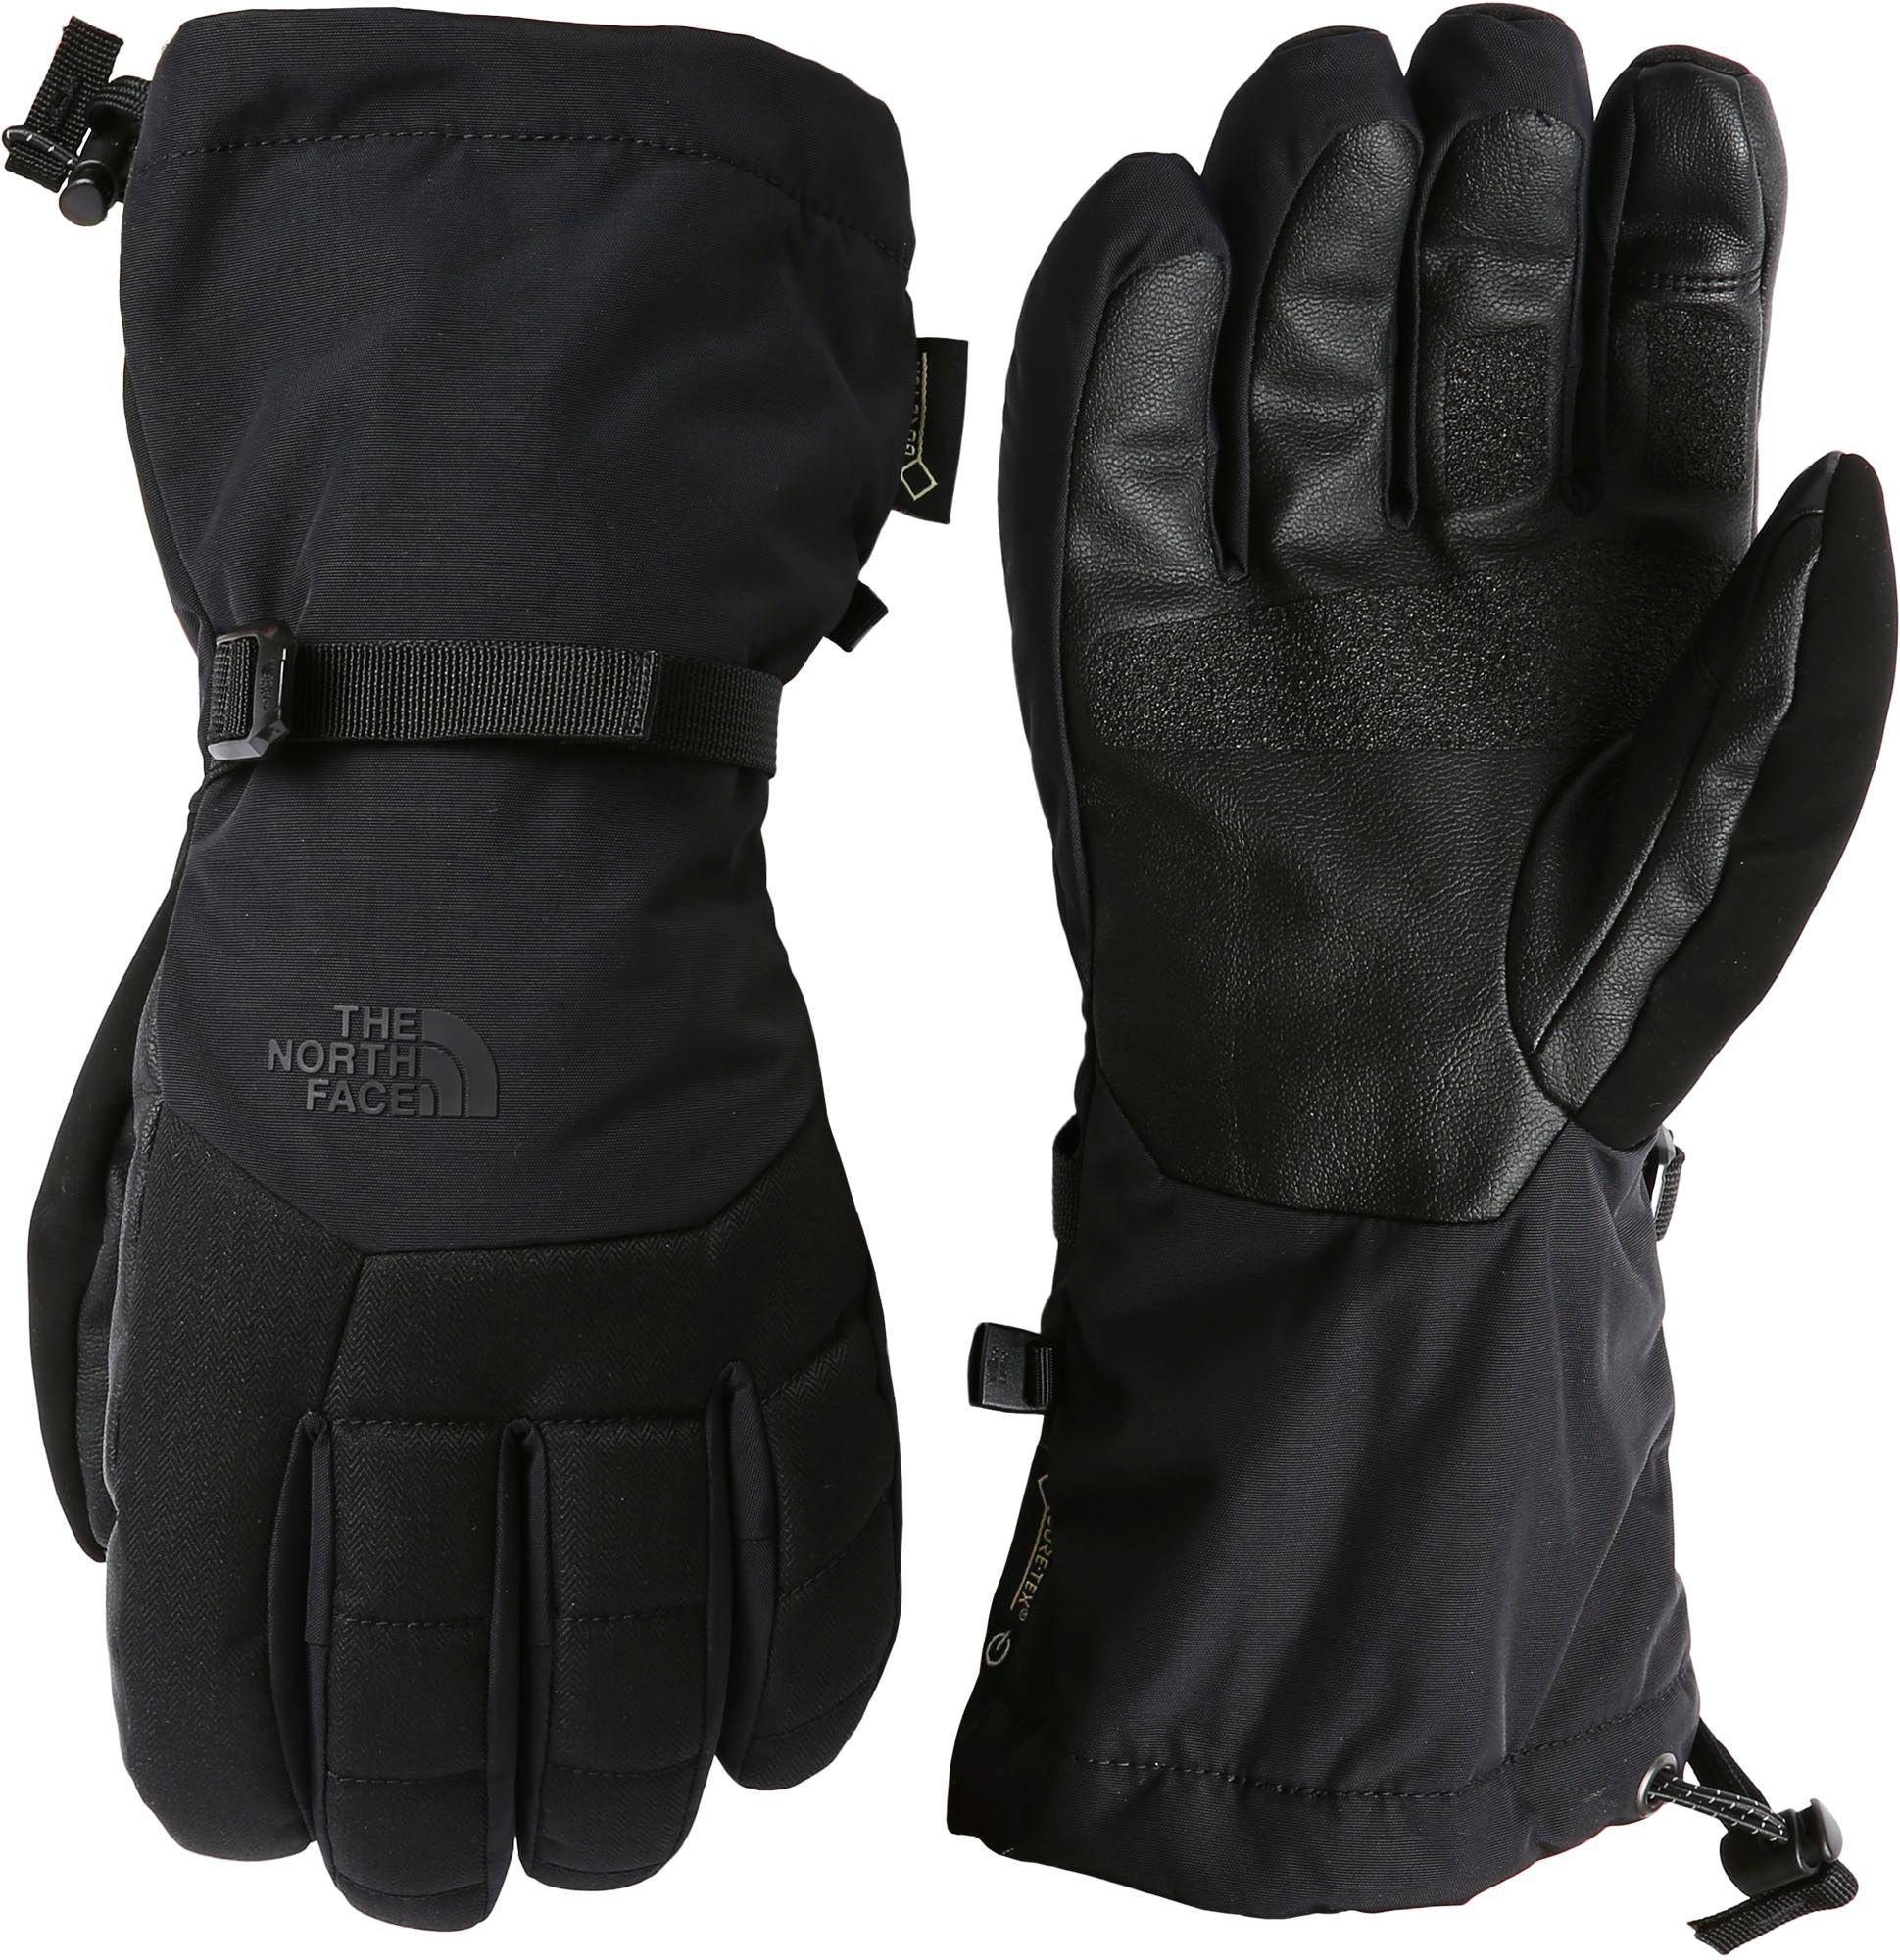 The North Face Men’s Montana GORE-TEX Glove NF0A334A The North Face ktmart 0